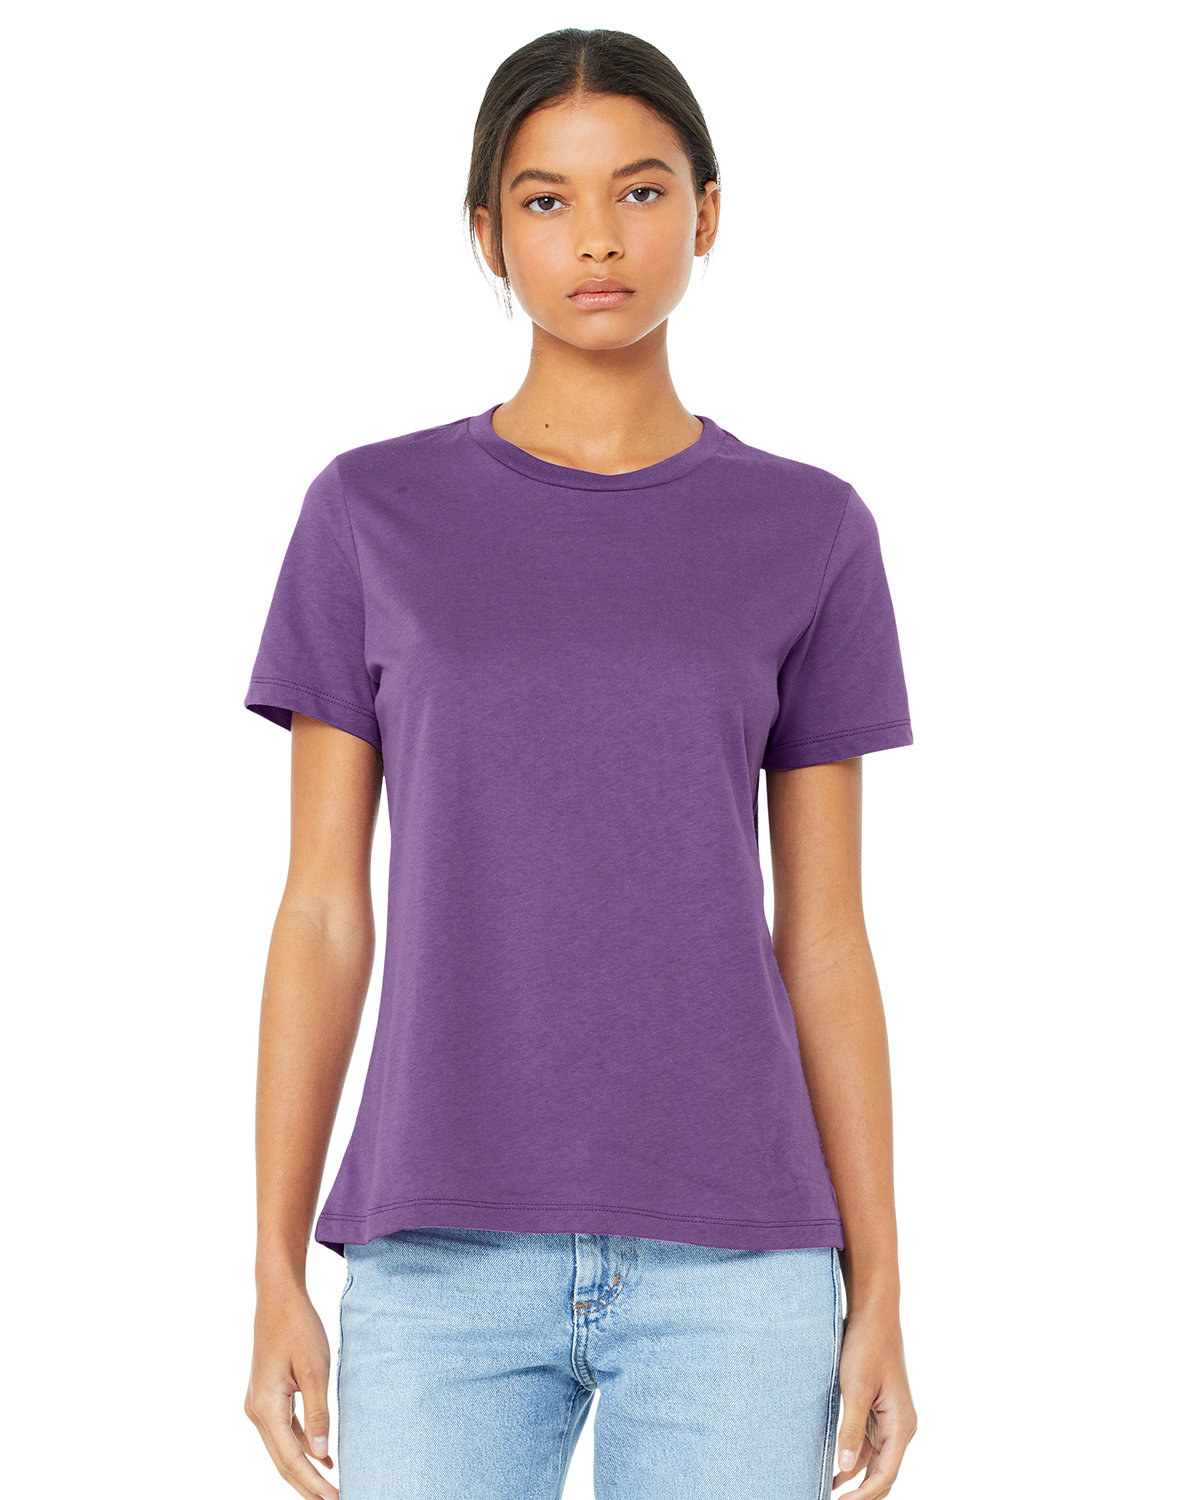 Bella + Canvas Ladies' Relaxed Jersey Short-Sleeve T-Shirt ROYAL PURPLE 